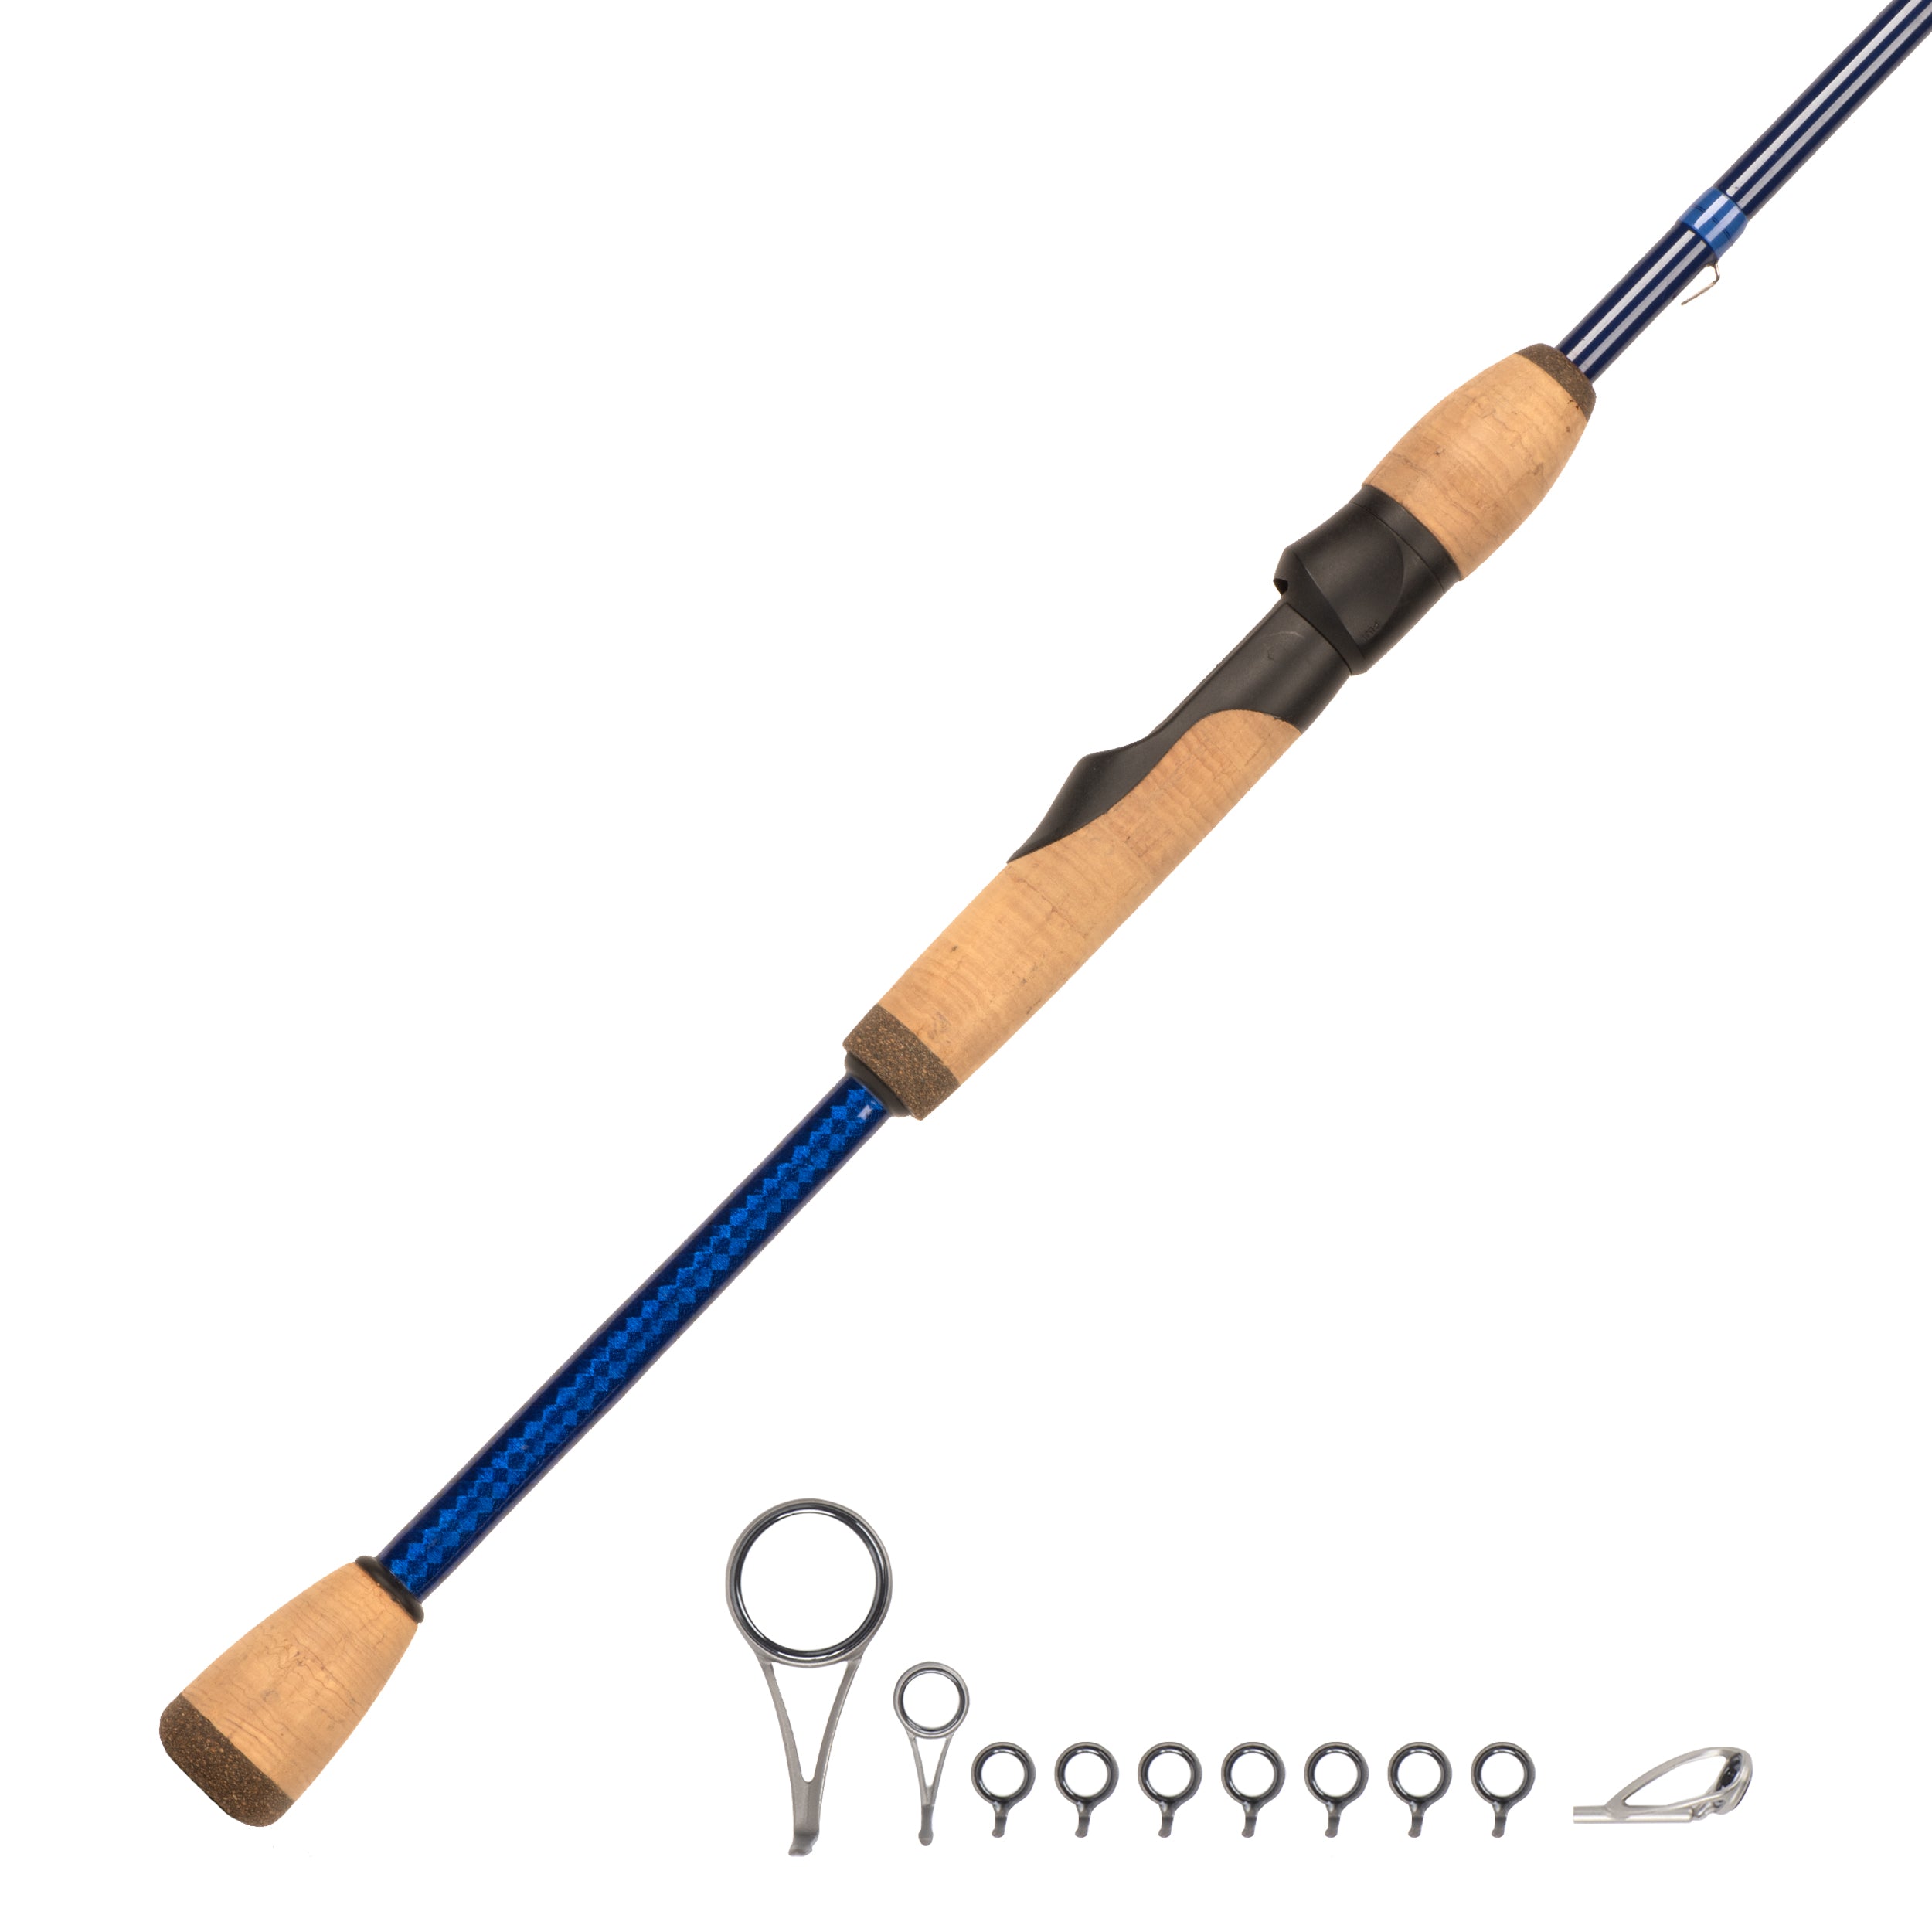 Jake's Lil Mullet 7'6” Med-Heavy All Around Inshore Fishing Rod Compon